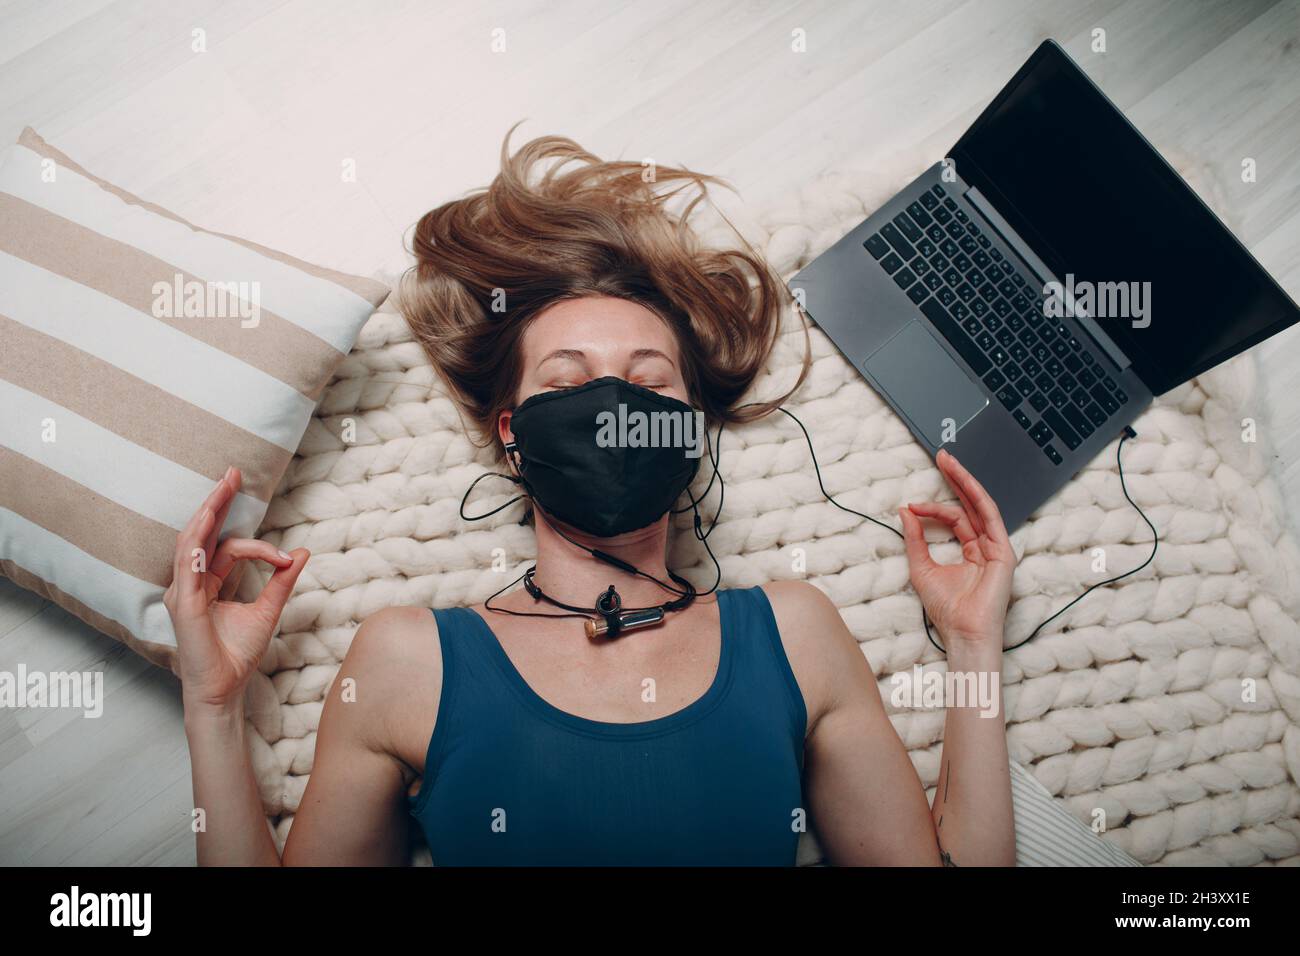 Adult mature woman doing yoga nidra and lay in face mask at home living room with online tutorials on laptop Stock Photo